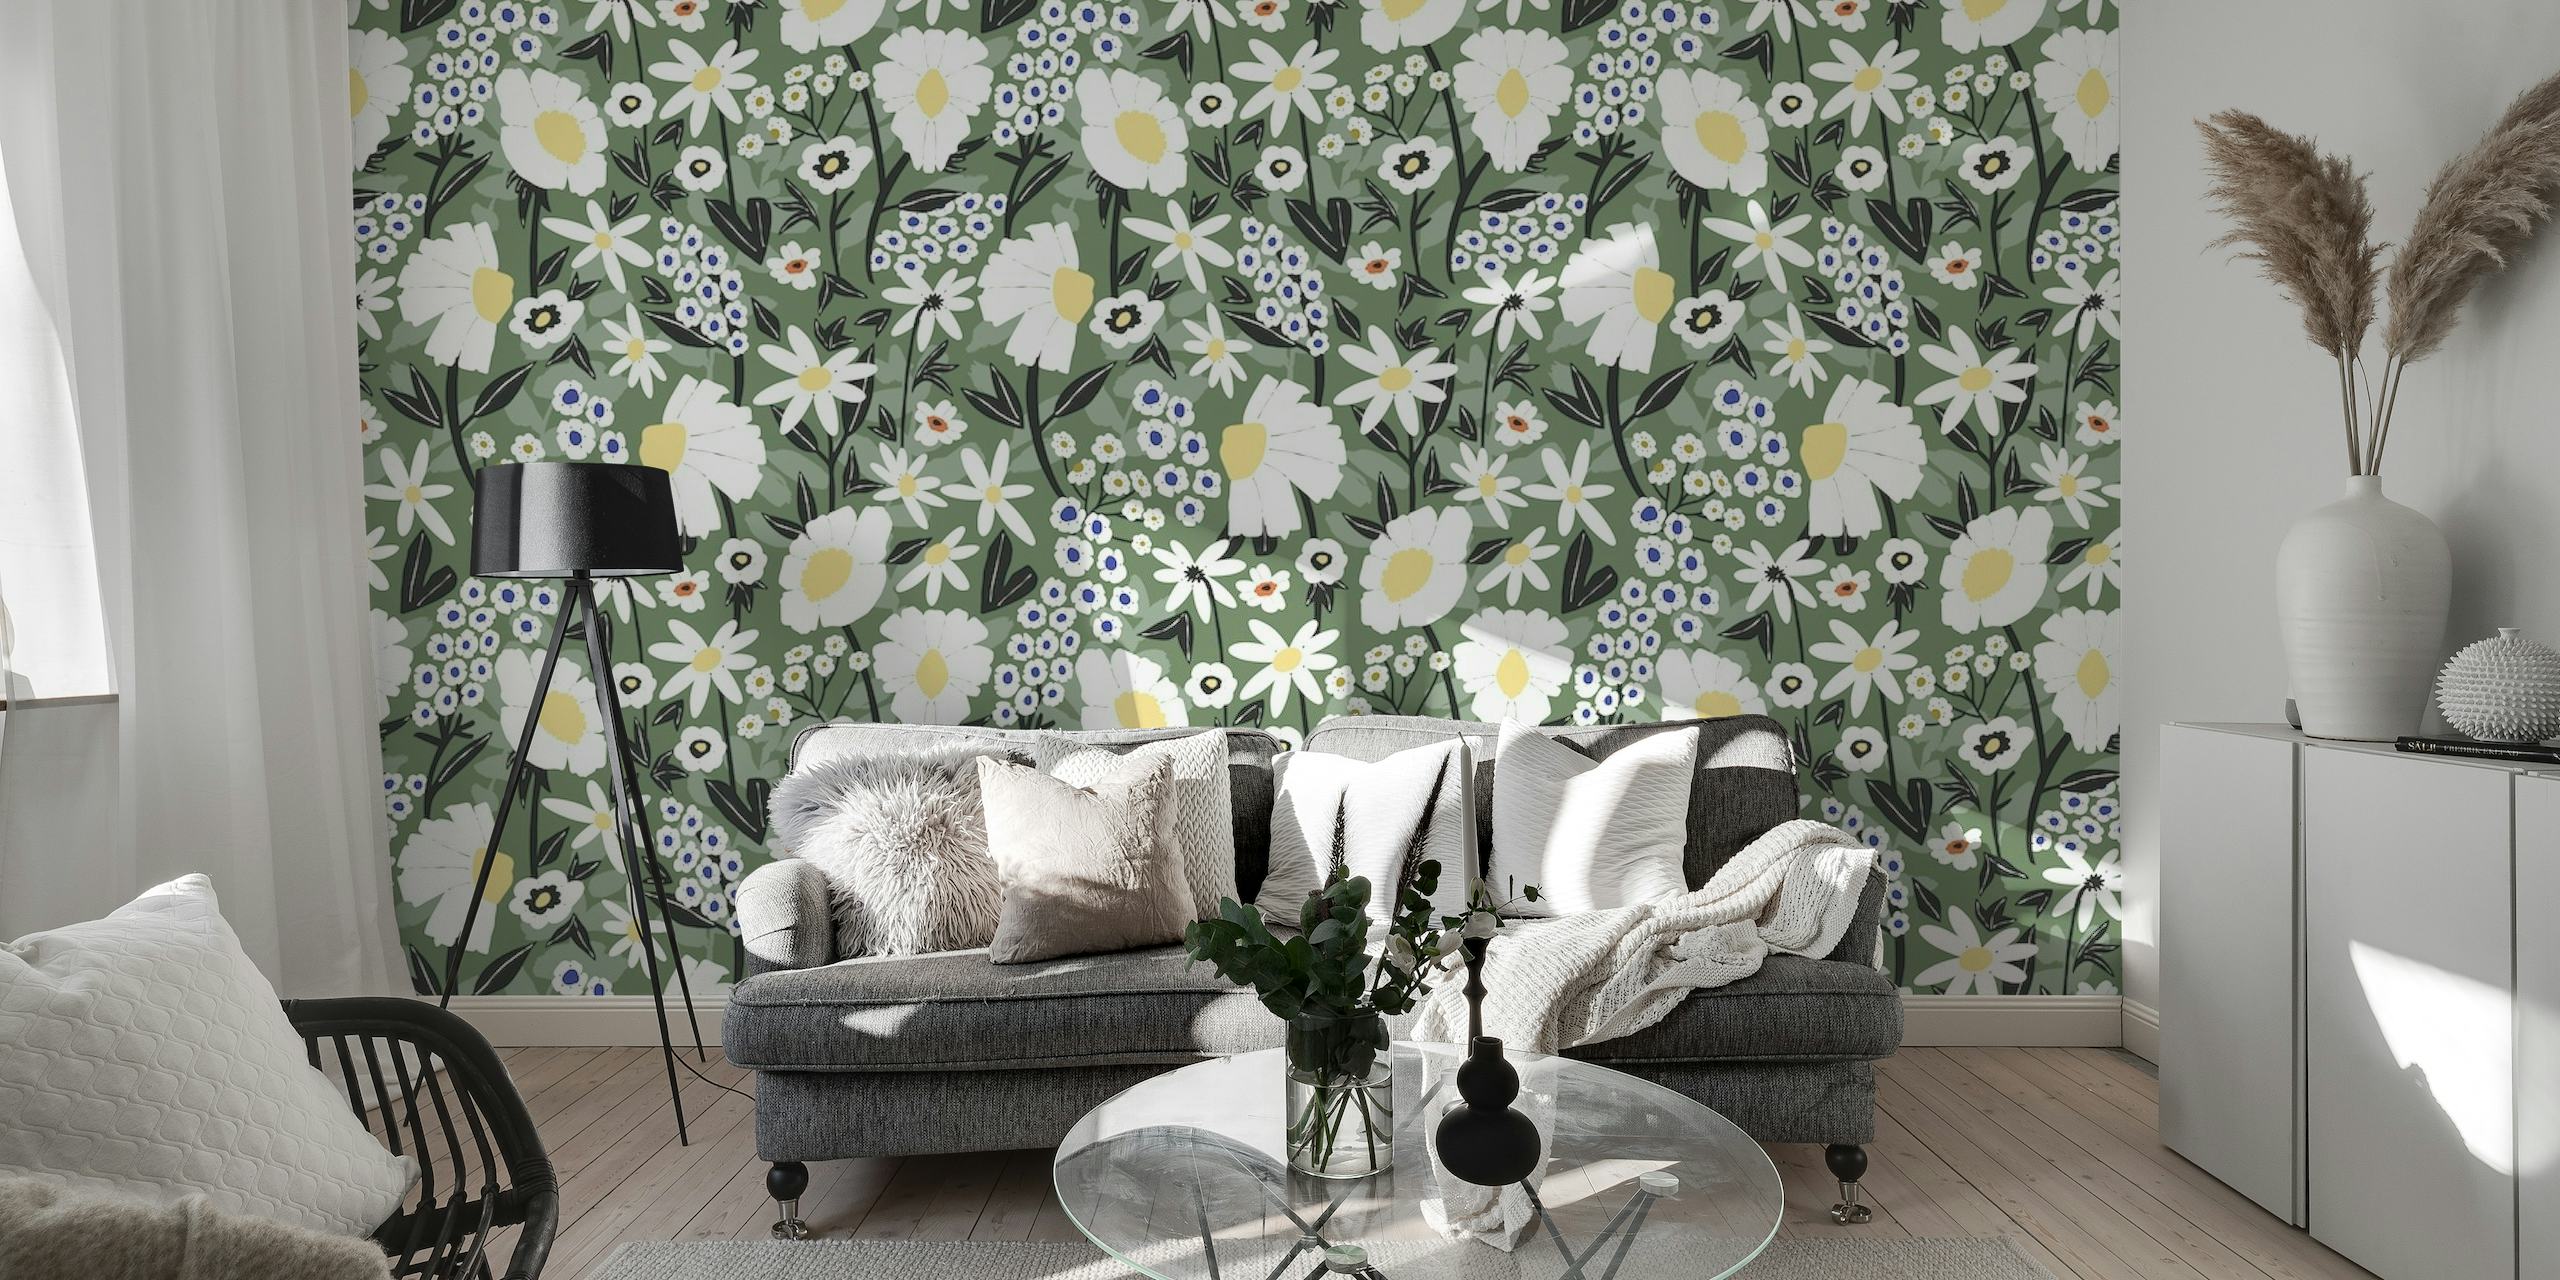 Meadow Forest Blossom wall mural with white flowers and green foliage pattern